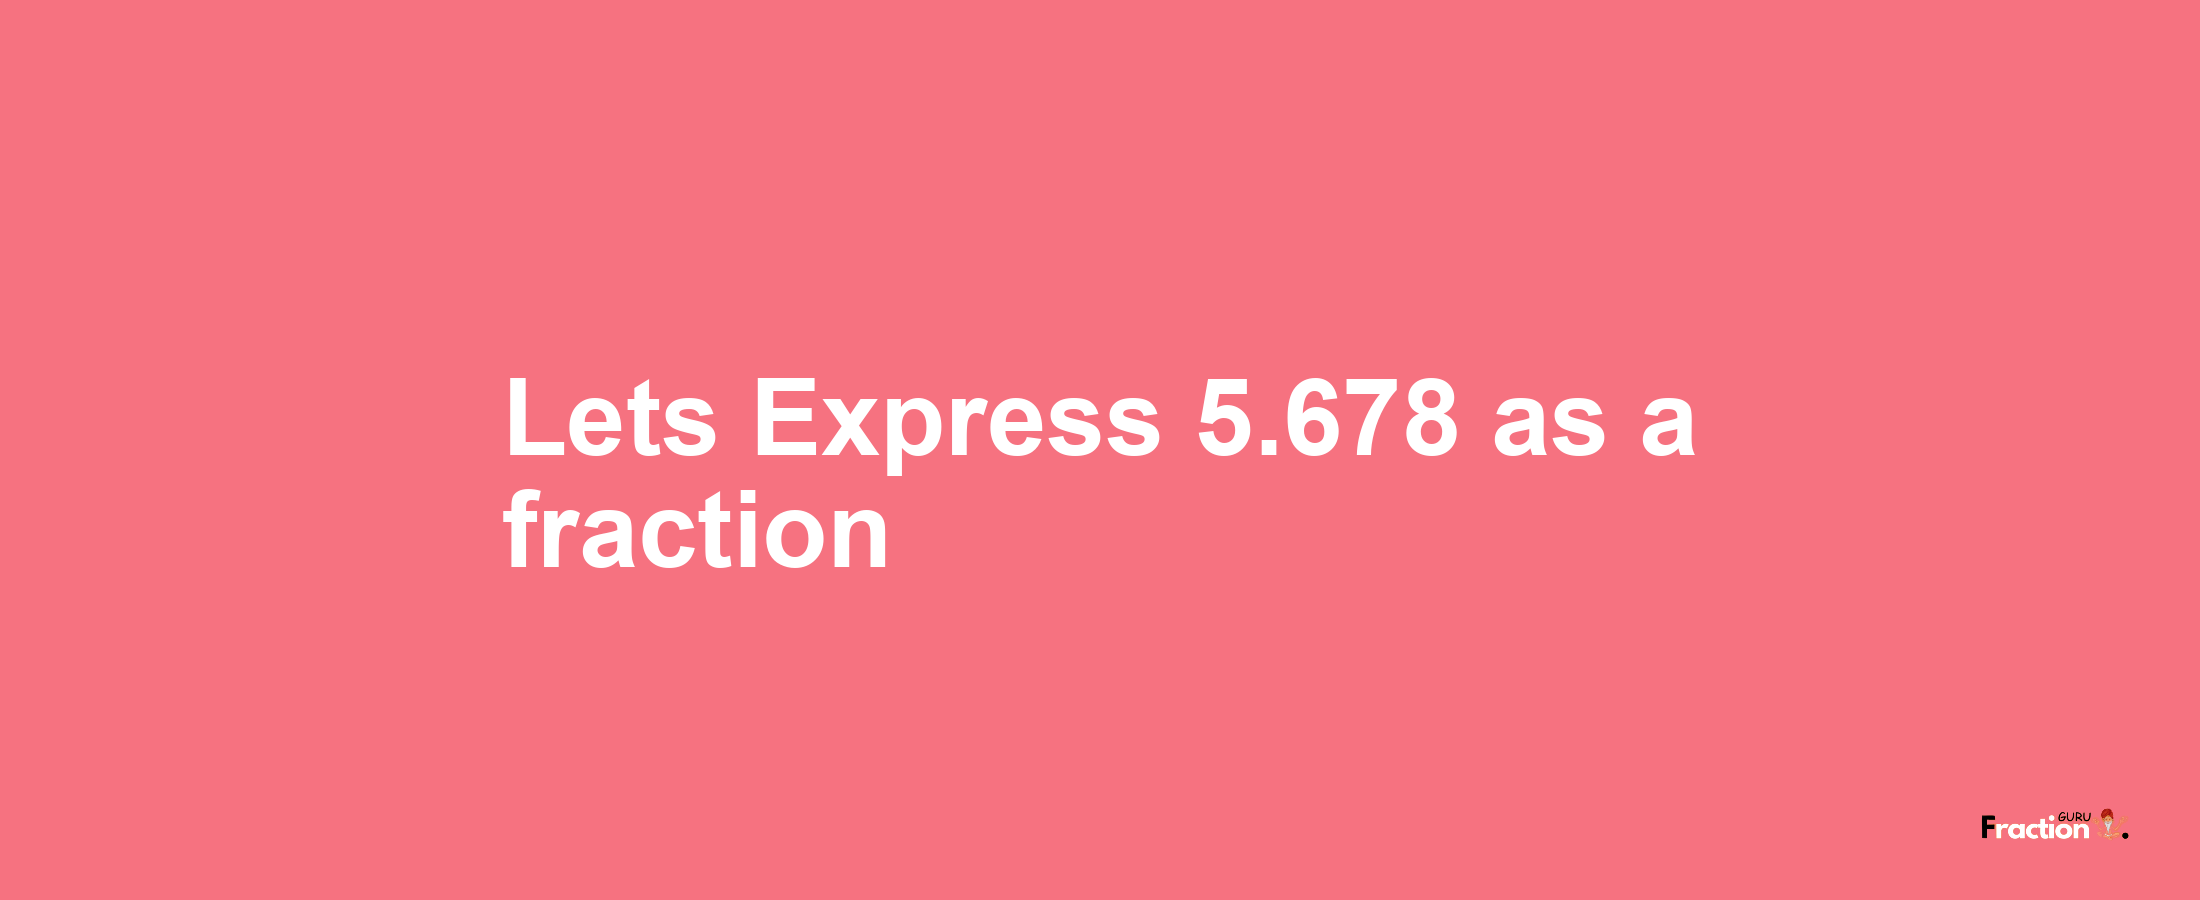 Lets Express 5.678 as afraction